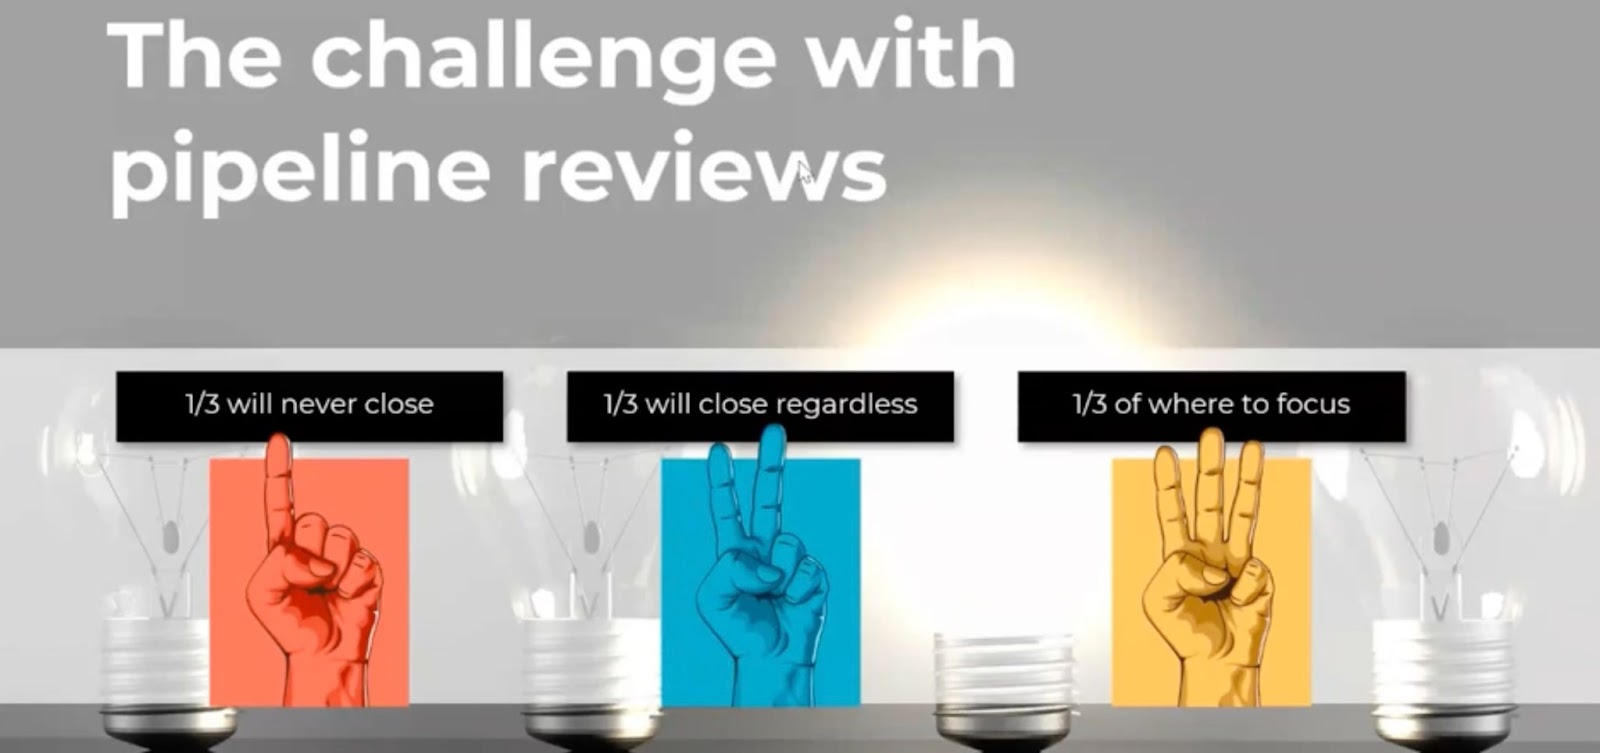 An image with text that reads: The challenge with pipeline reviews - 1/3 will never close, 1/3 will close regardless, 1/3 of where to focus.